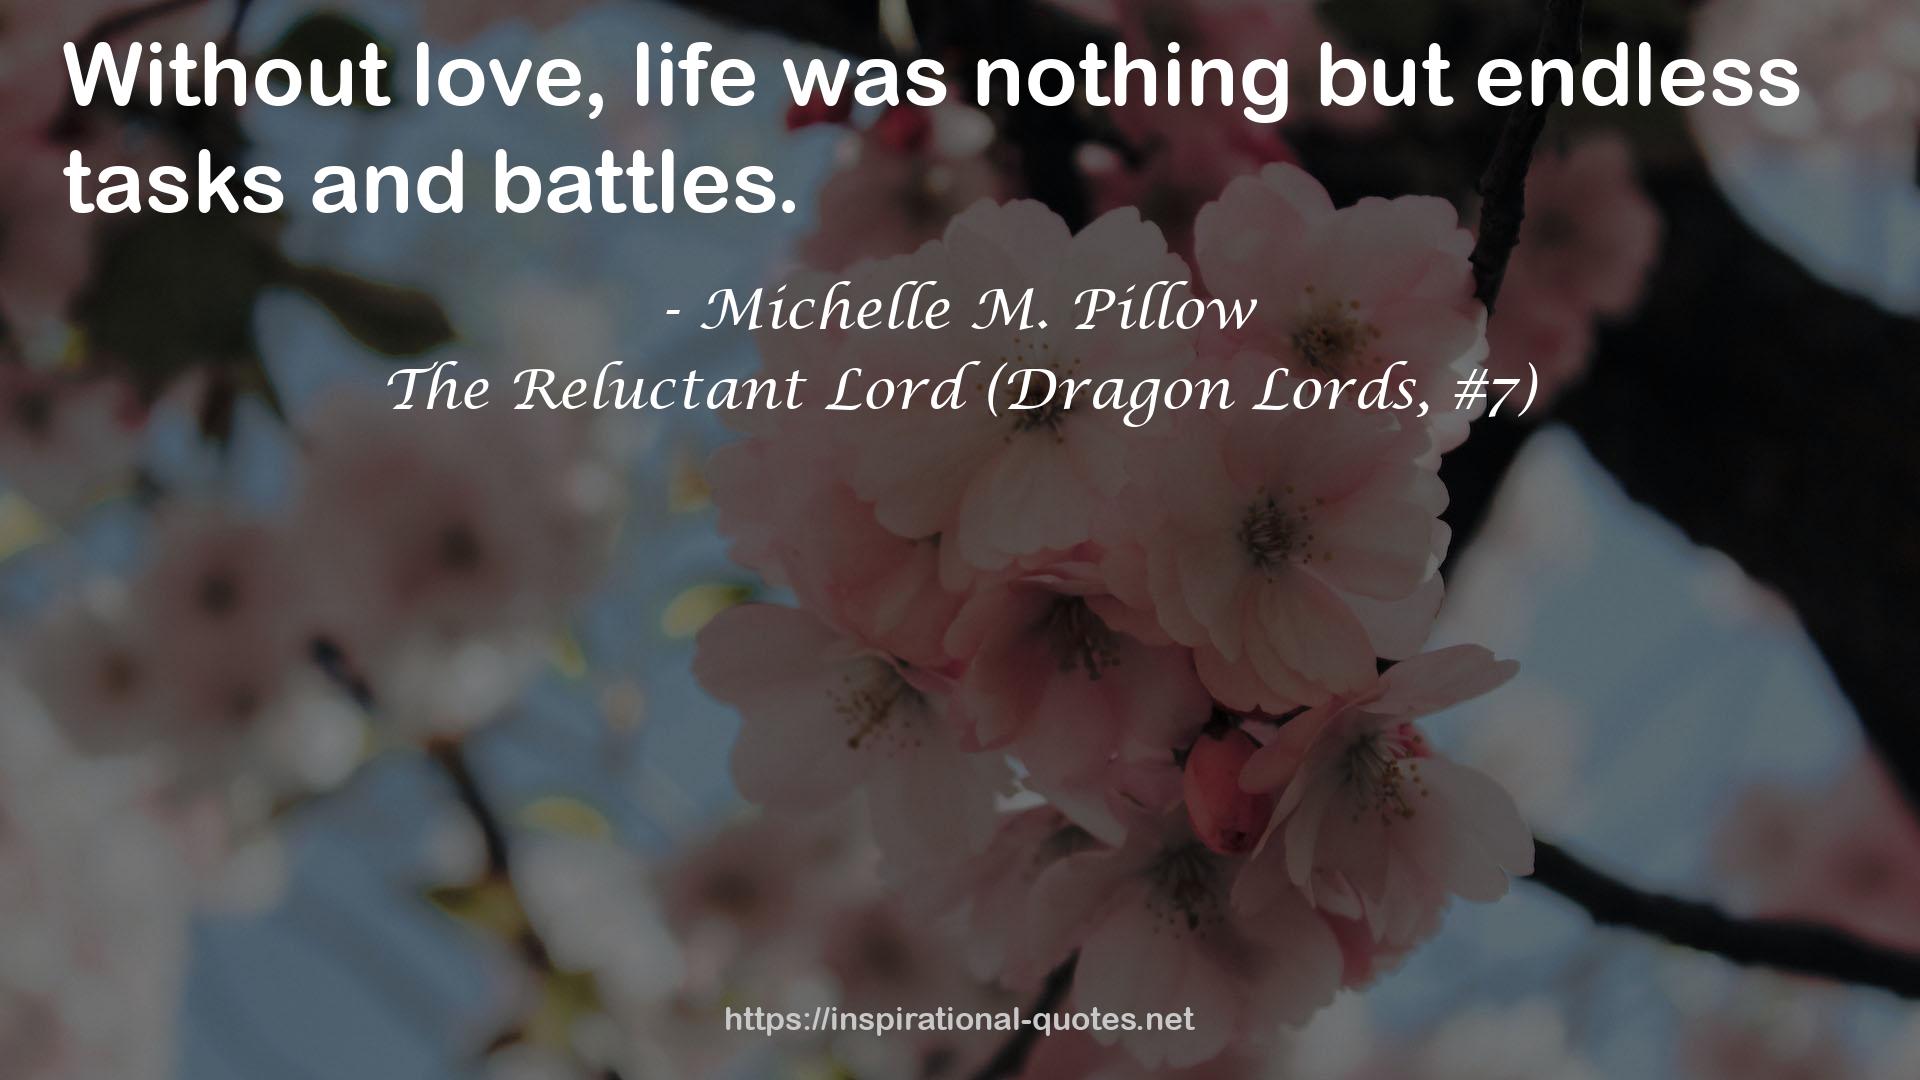 The Reluctant Lord (Dragon Lords, #7) QUOTES